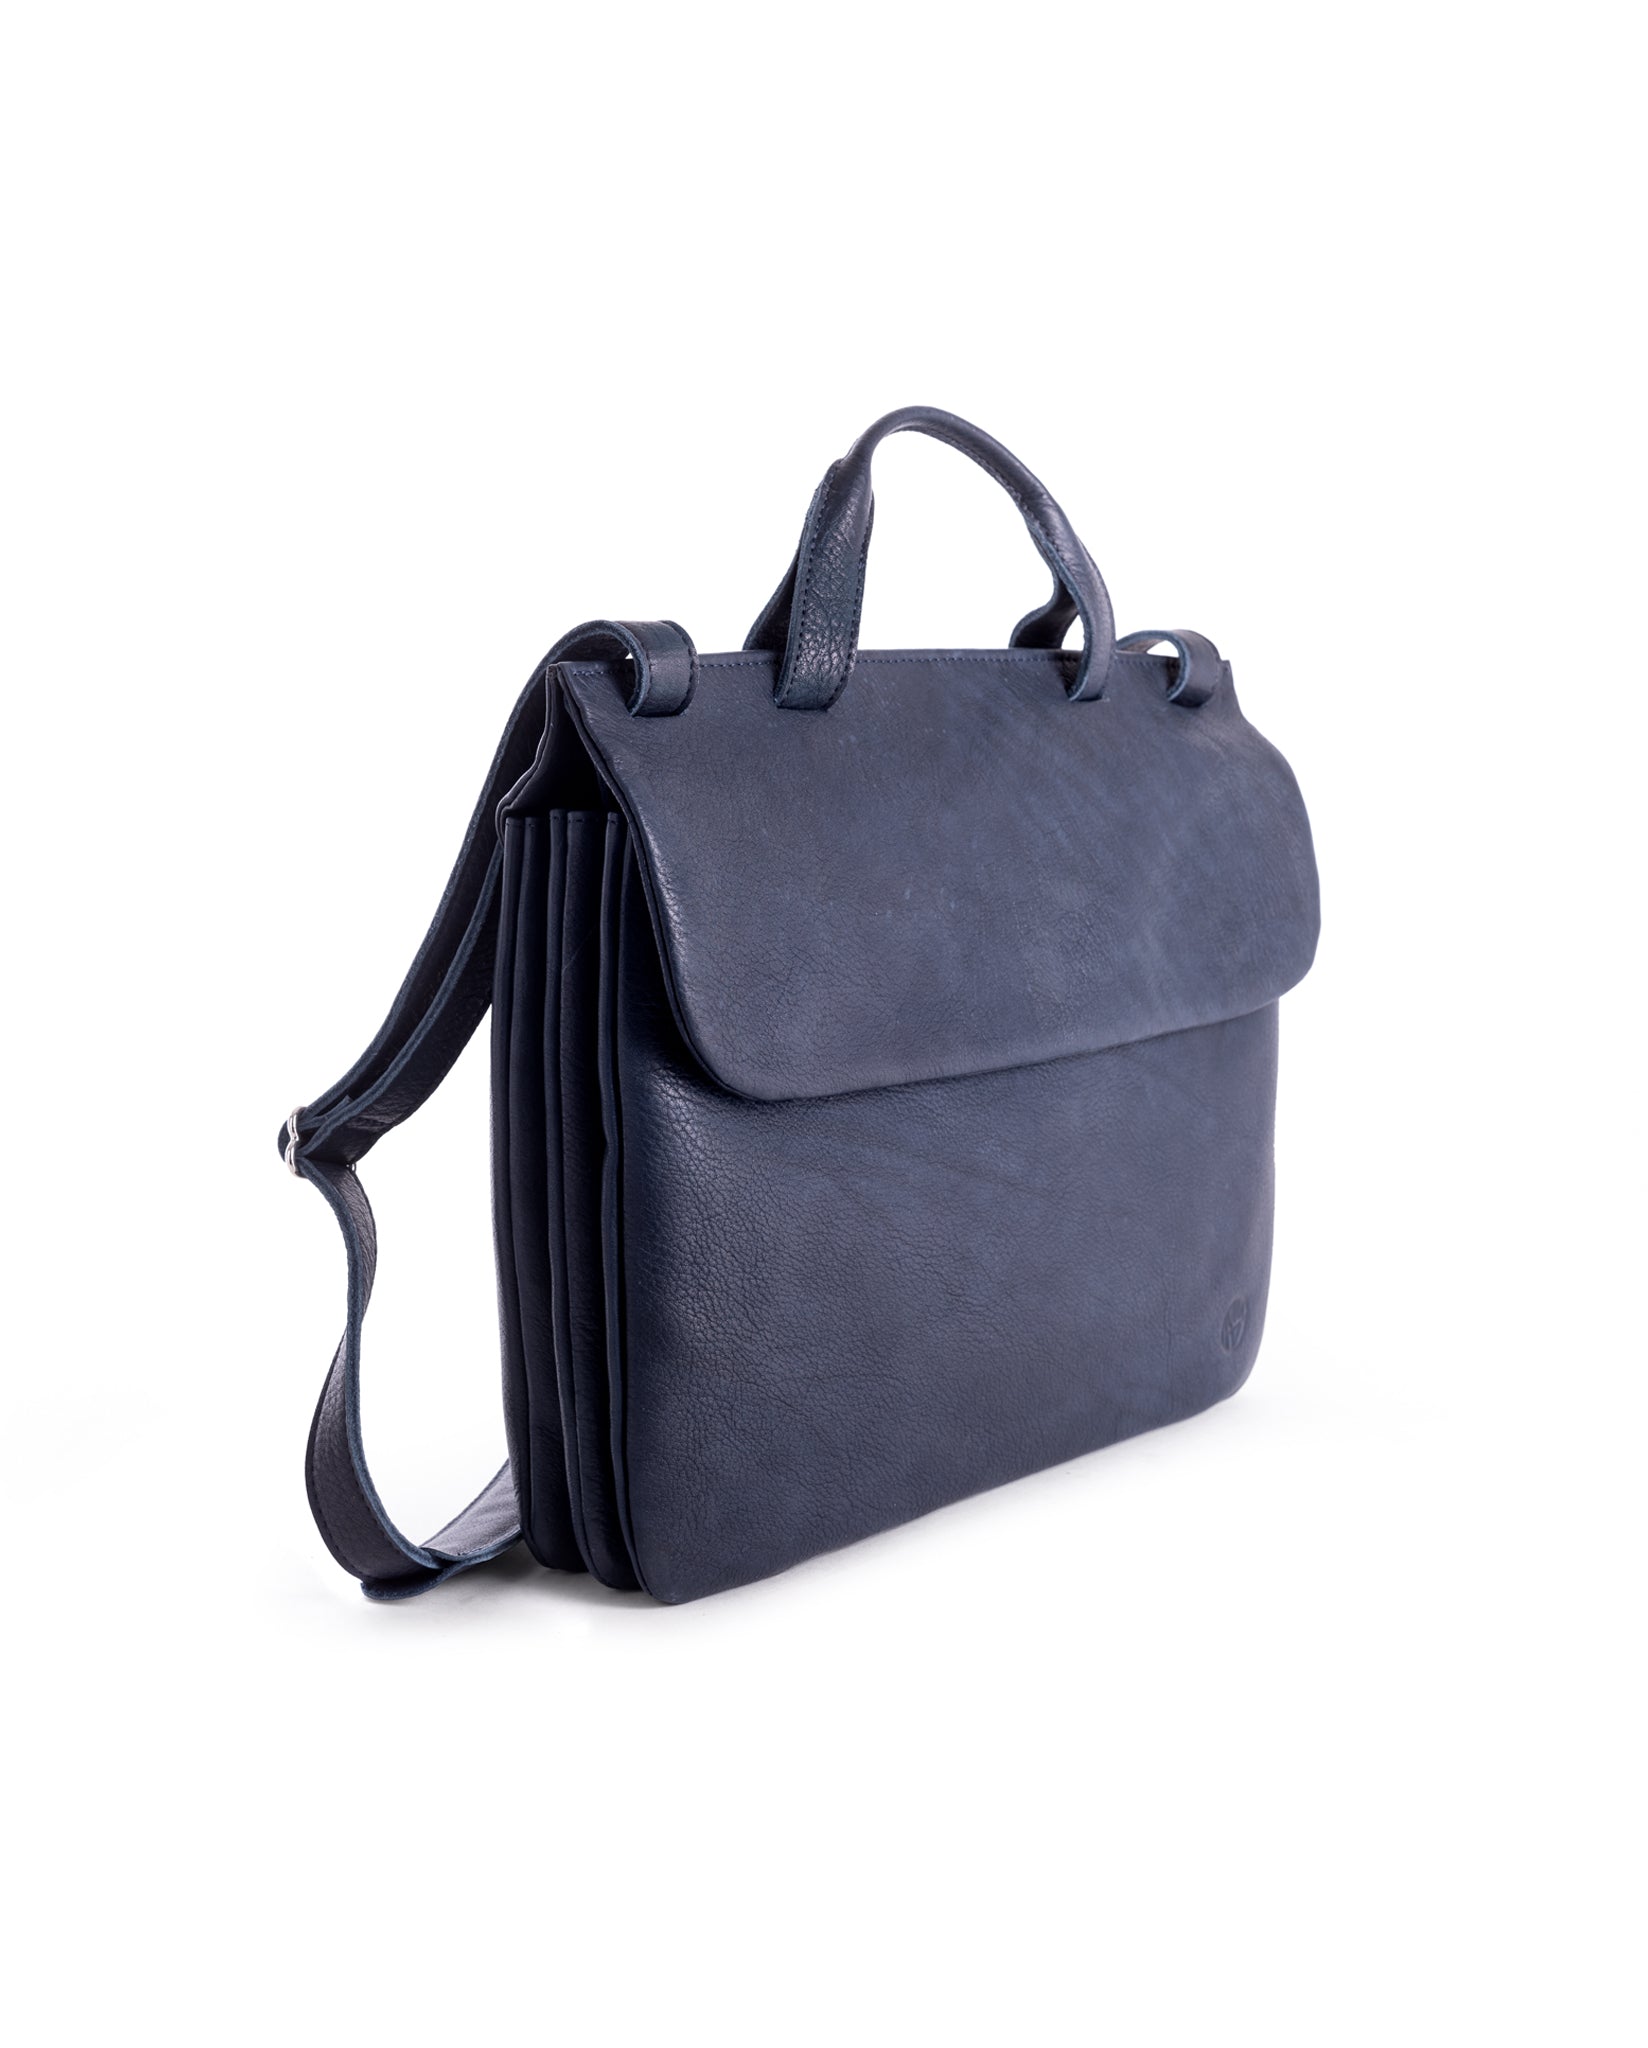 Chacoral smooth Business Bag